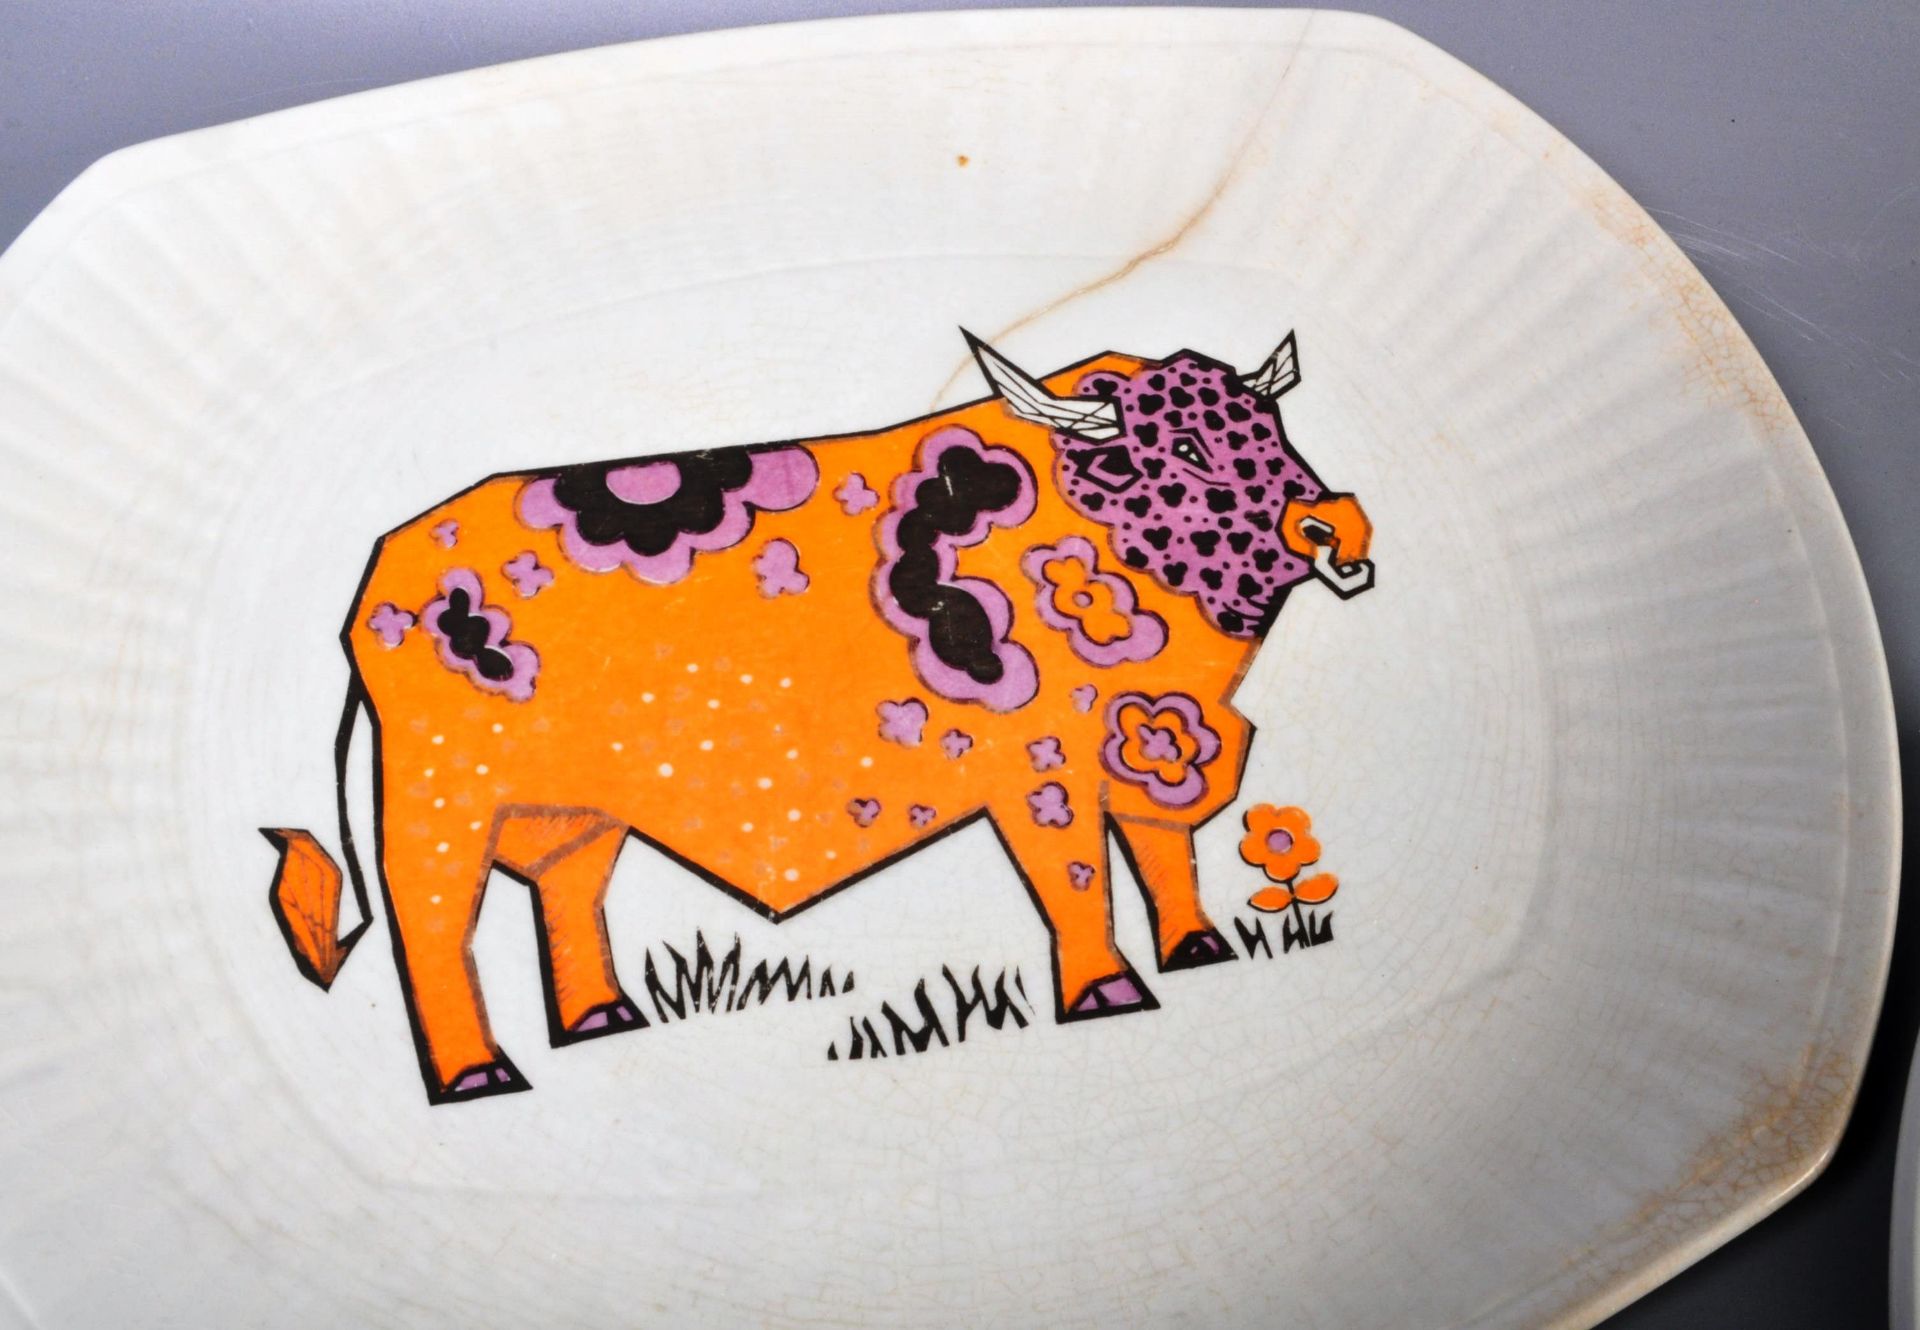 SET OF 1970'S PSYCHEDELIC BEEFEATER COW PLATES - Image 2 of 8